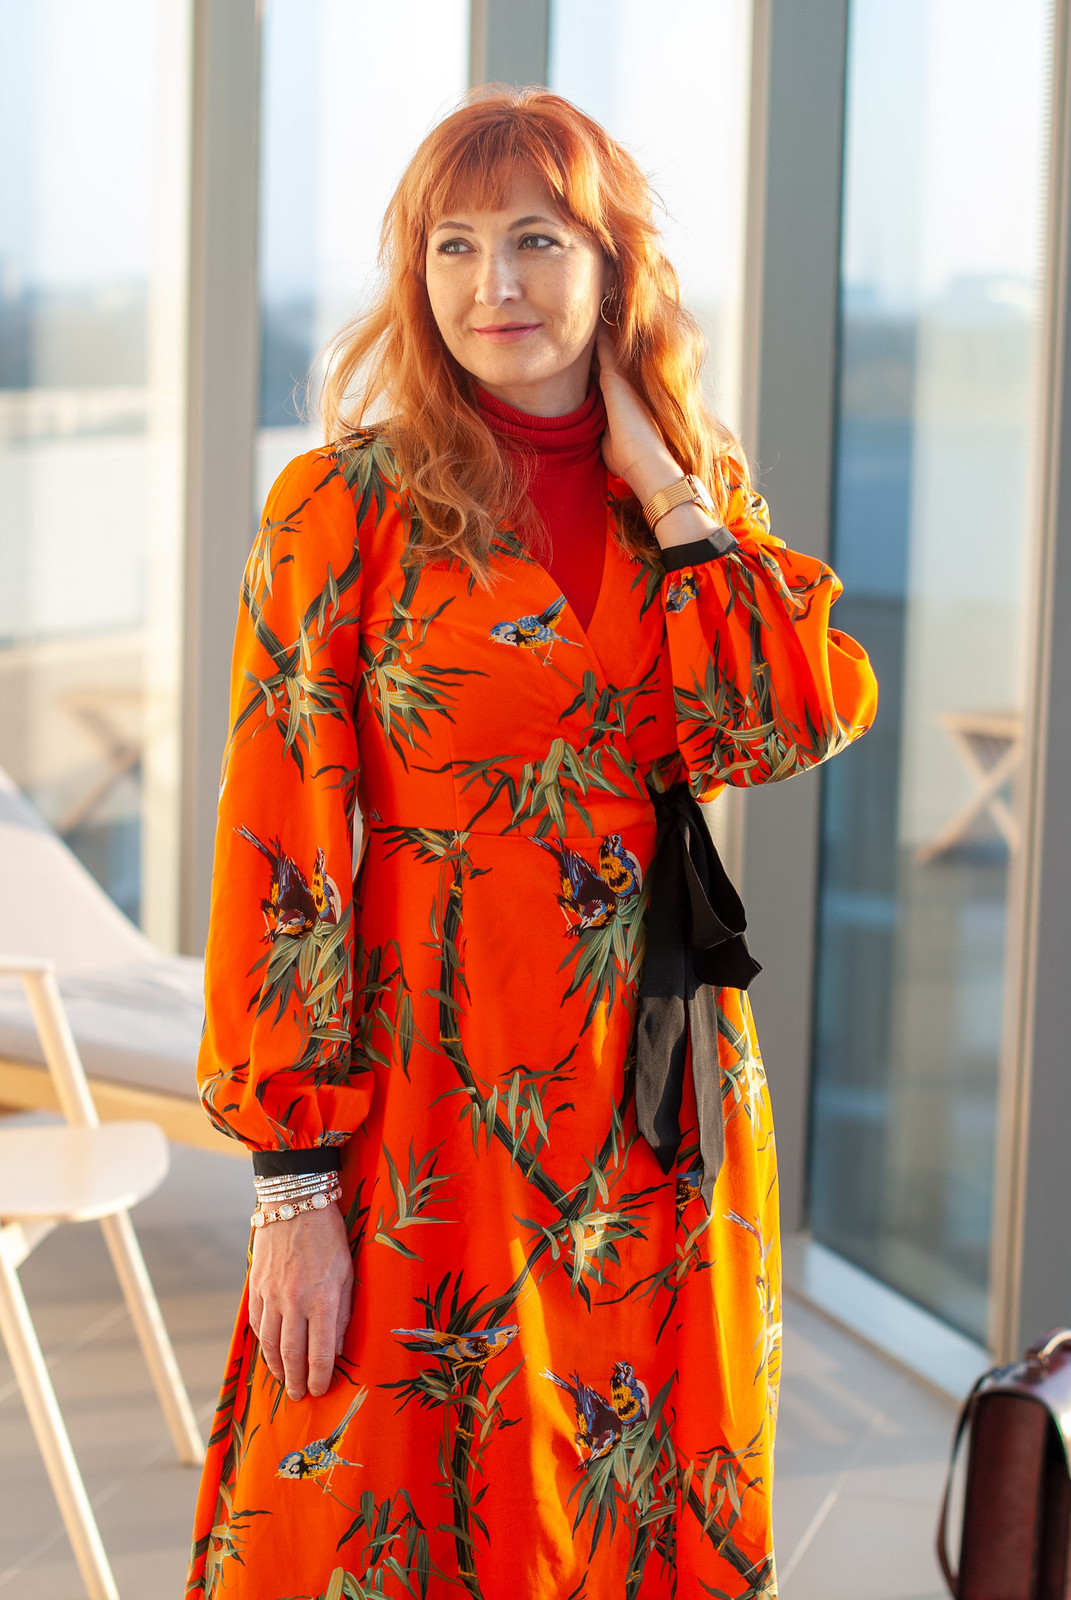 Layering a Midi Dress and Trousers Under a Tailored Coat \ orange floral midi dress \ navy pinstripe tailored coat \ emerald green trousers \ snakeskin and suede ankle boots \ Beara Beara leather backpack | Not Dressed As Lamb, over 40 style